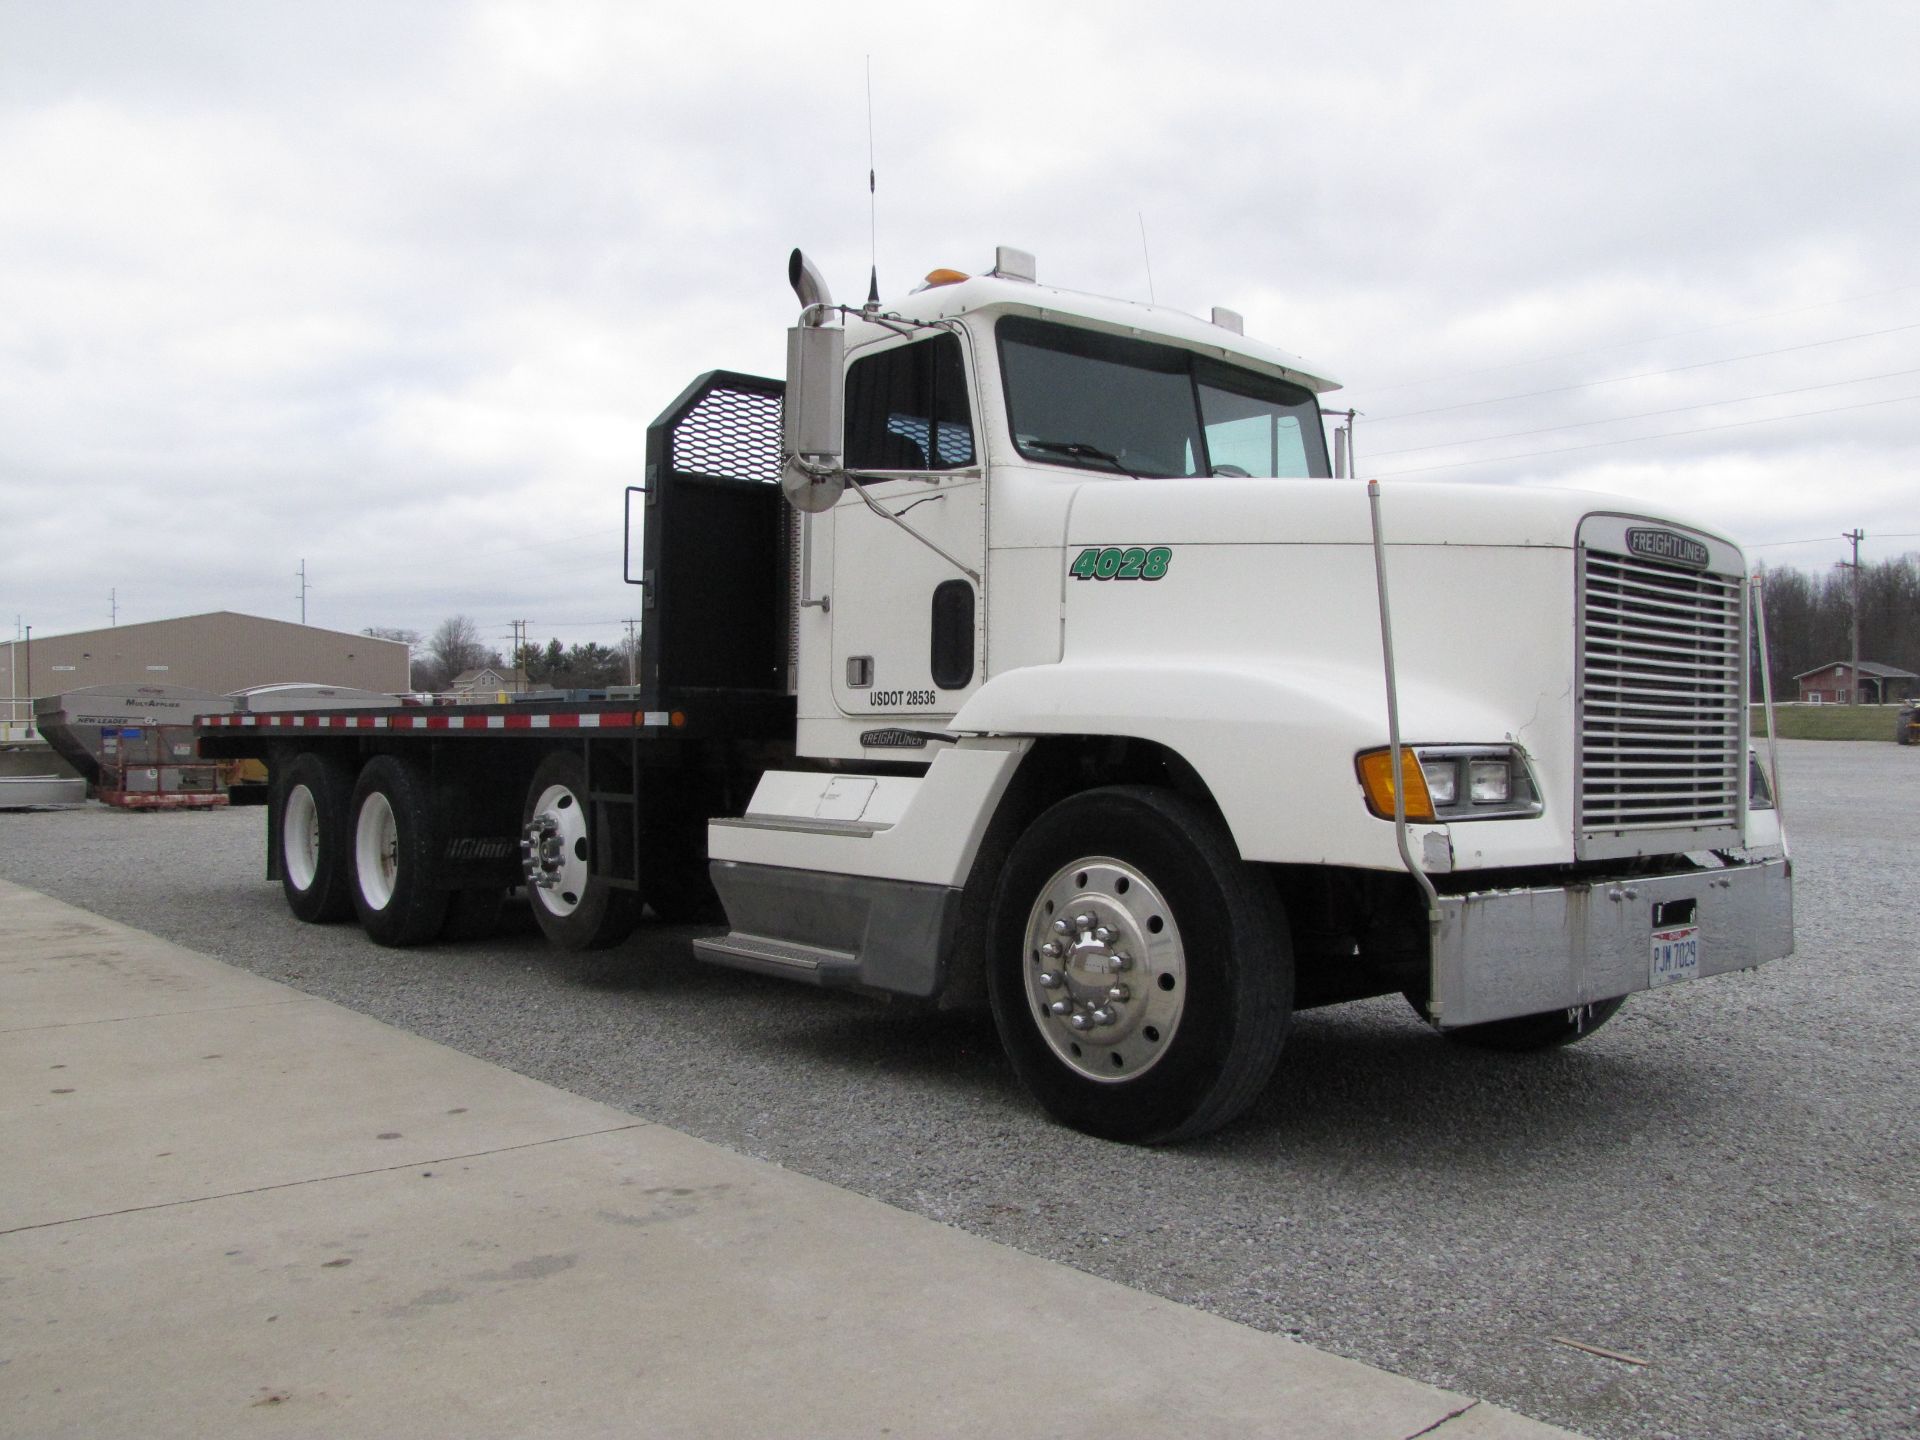 1993 Freightliner FLD120 semi truck - Image 13 of 71